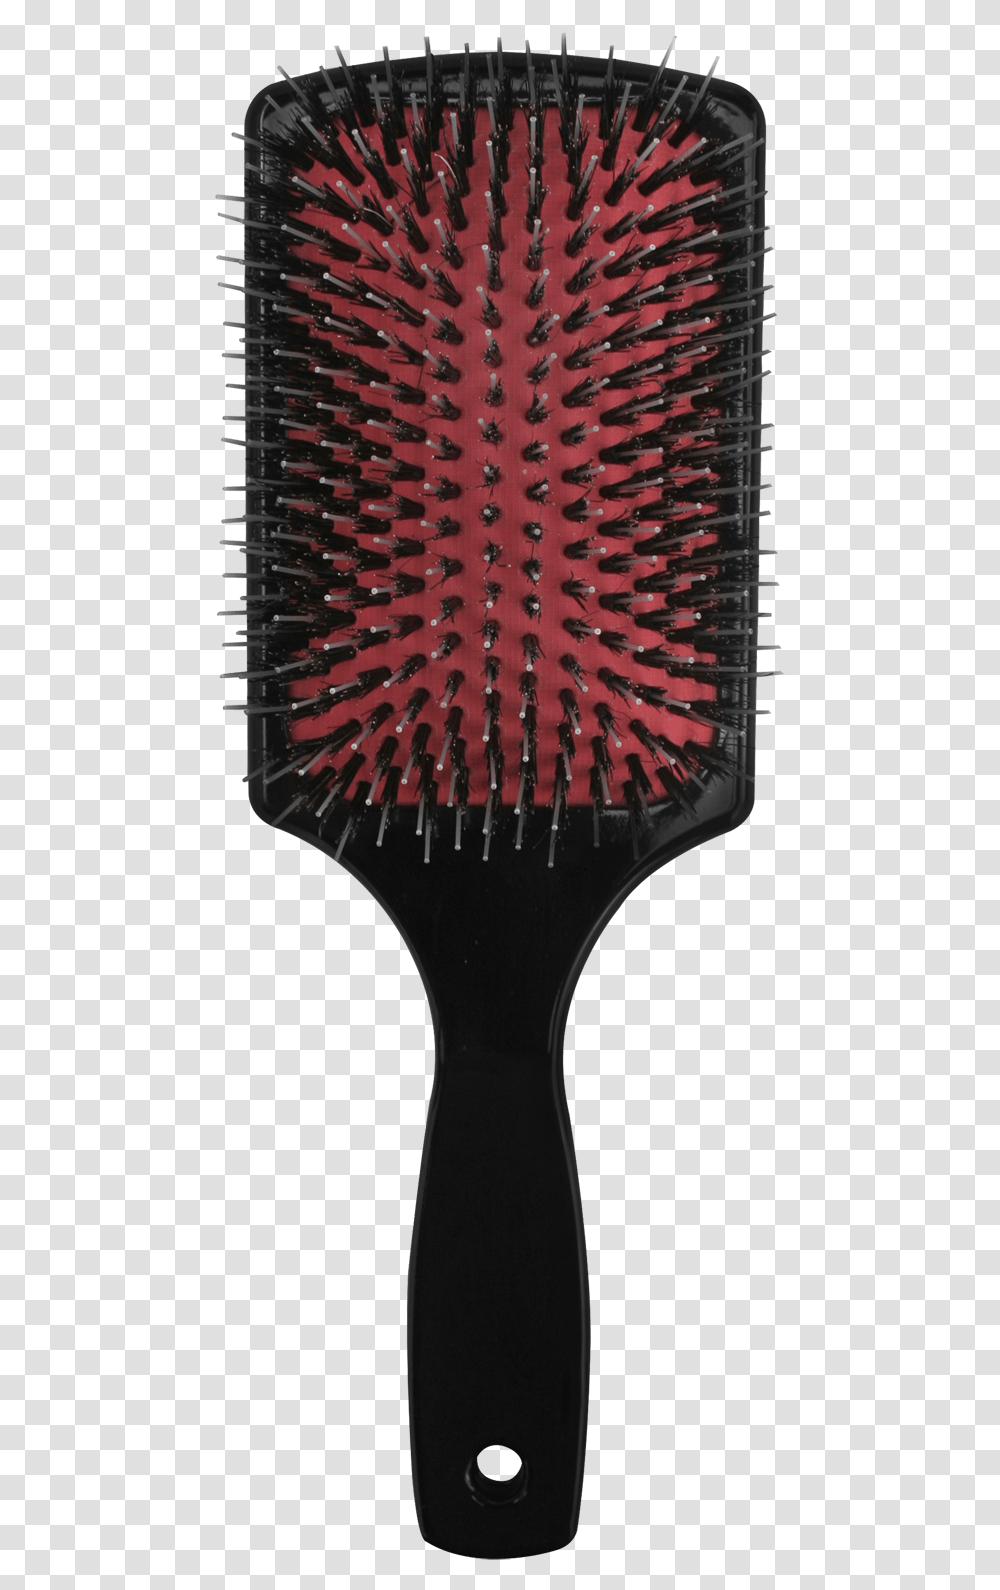 Oranjollie Hair Brush For Extensions Square Pattern Makeup Brushes, Tool, Toothbrush, Comb Transparent Png